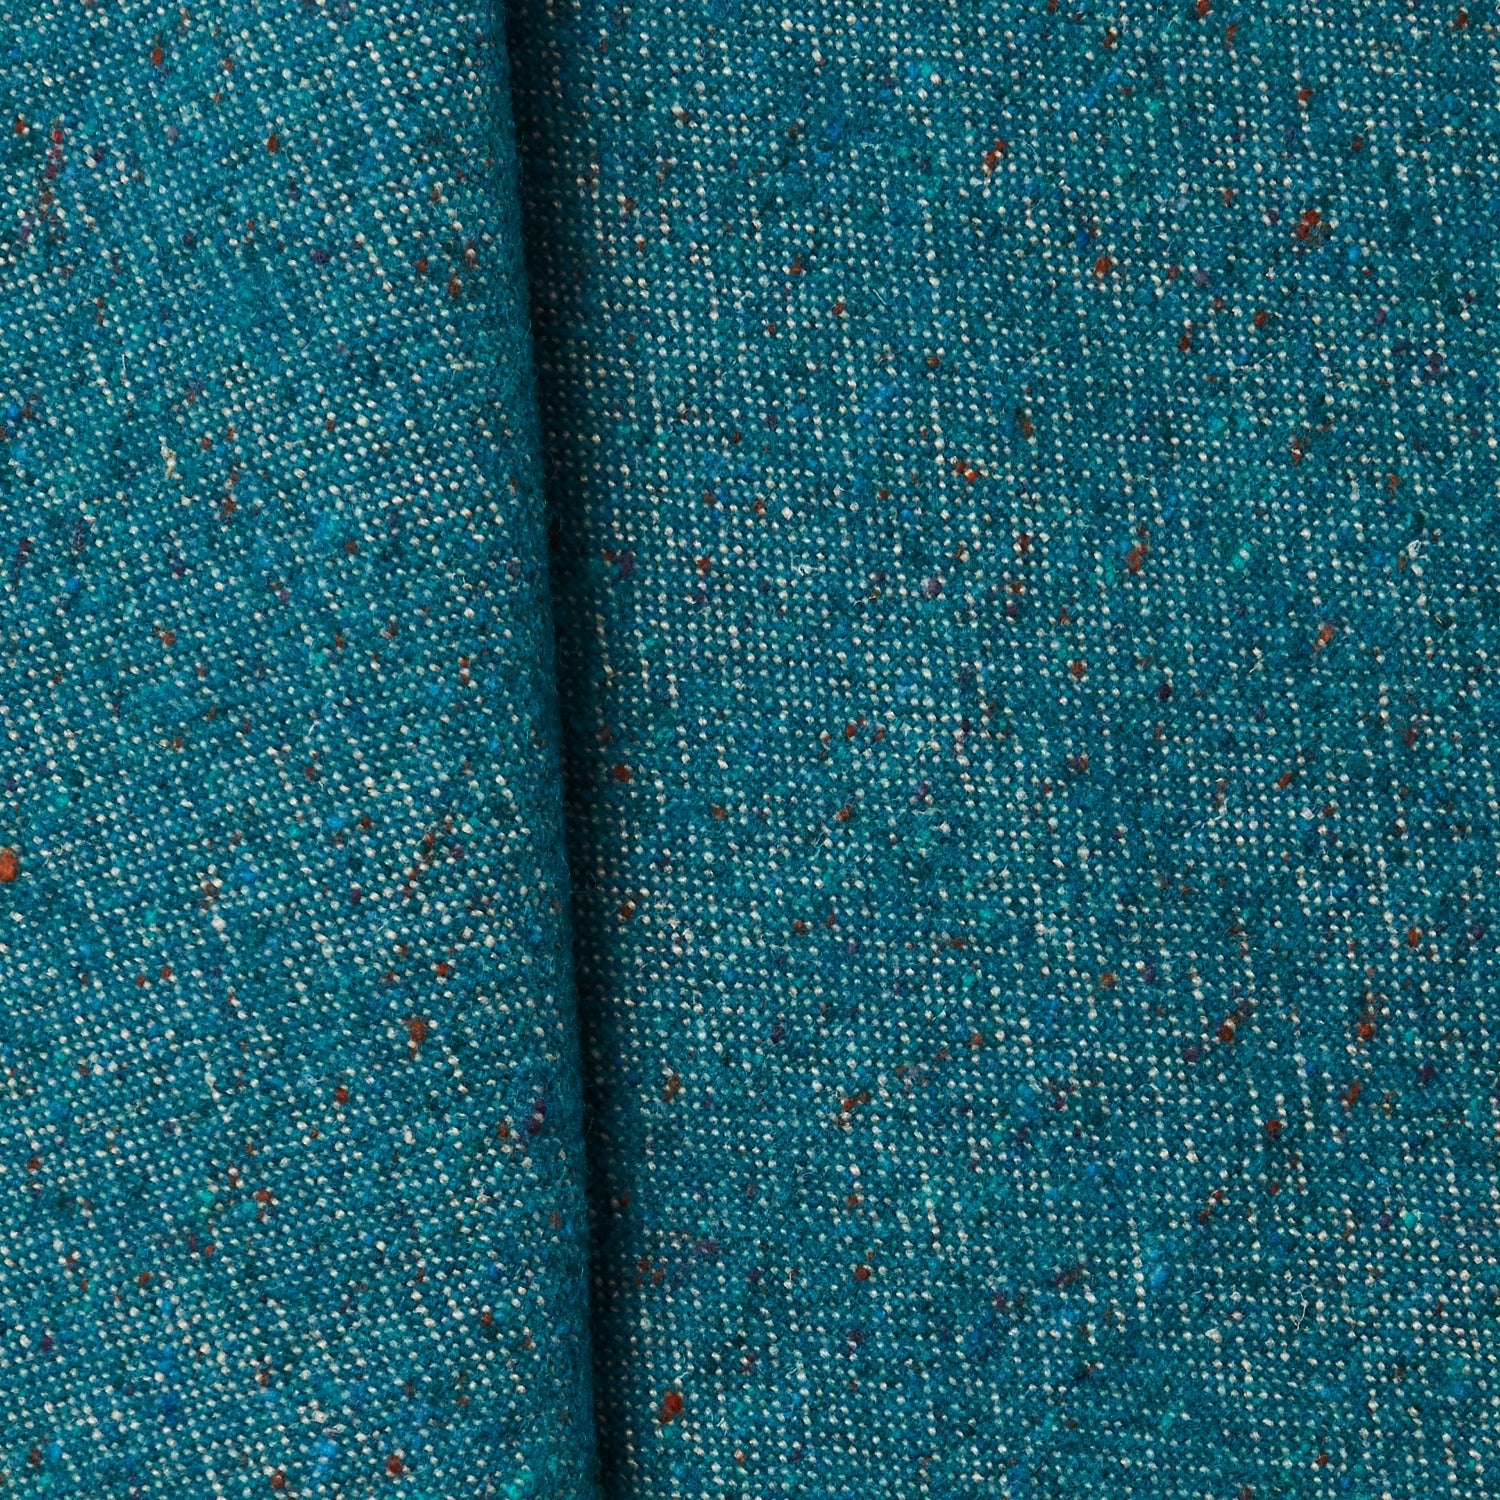 A draped swatch of blended linen-wool mix fabric in a flecked turquoise color.